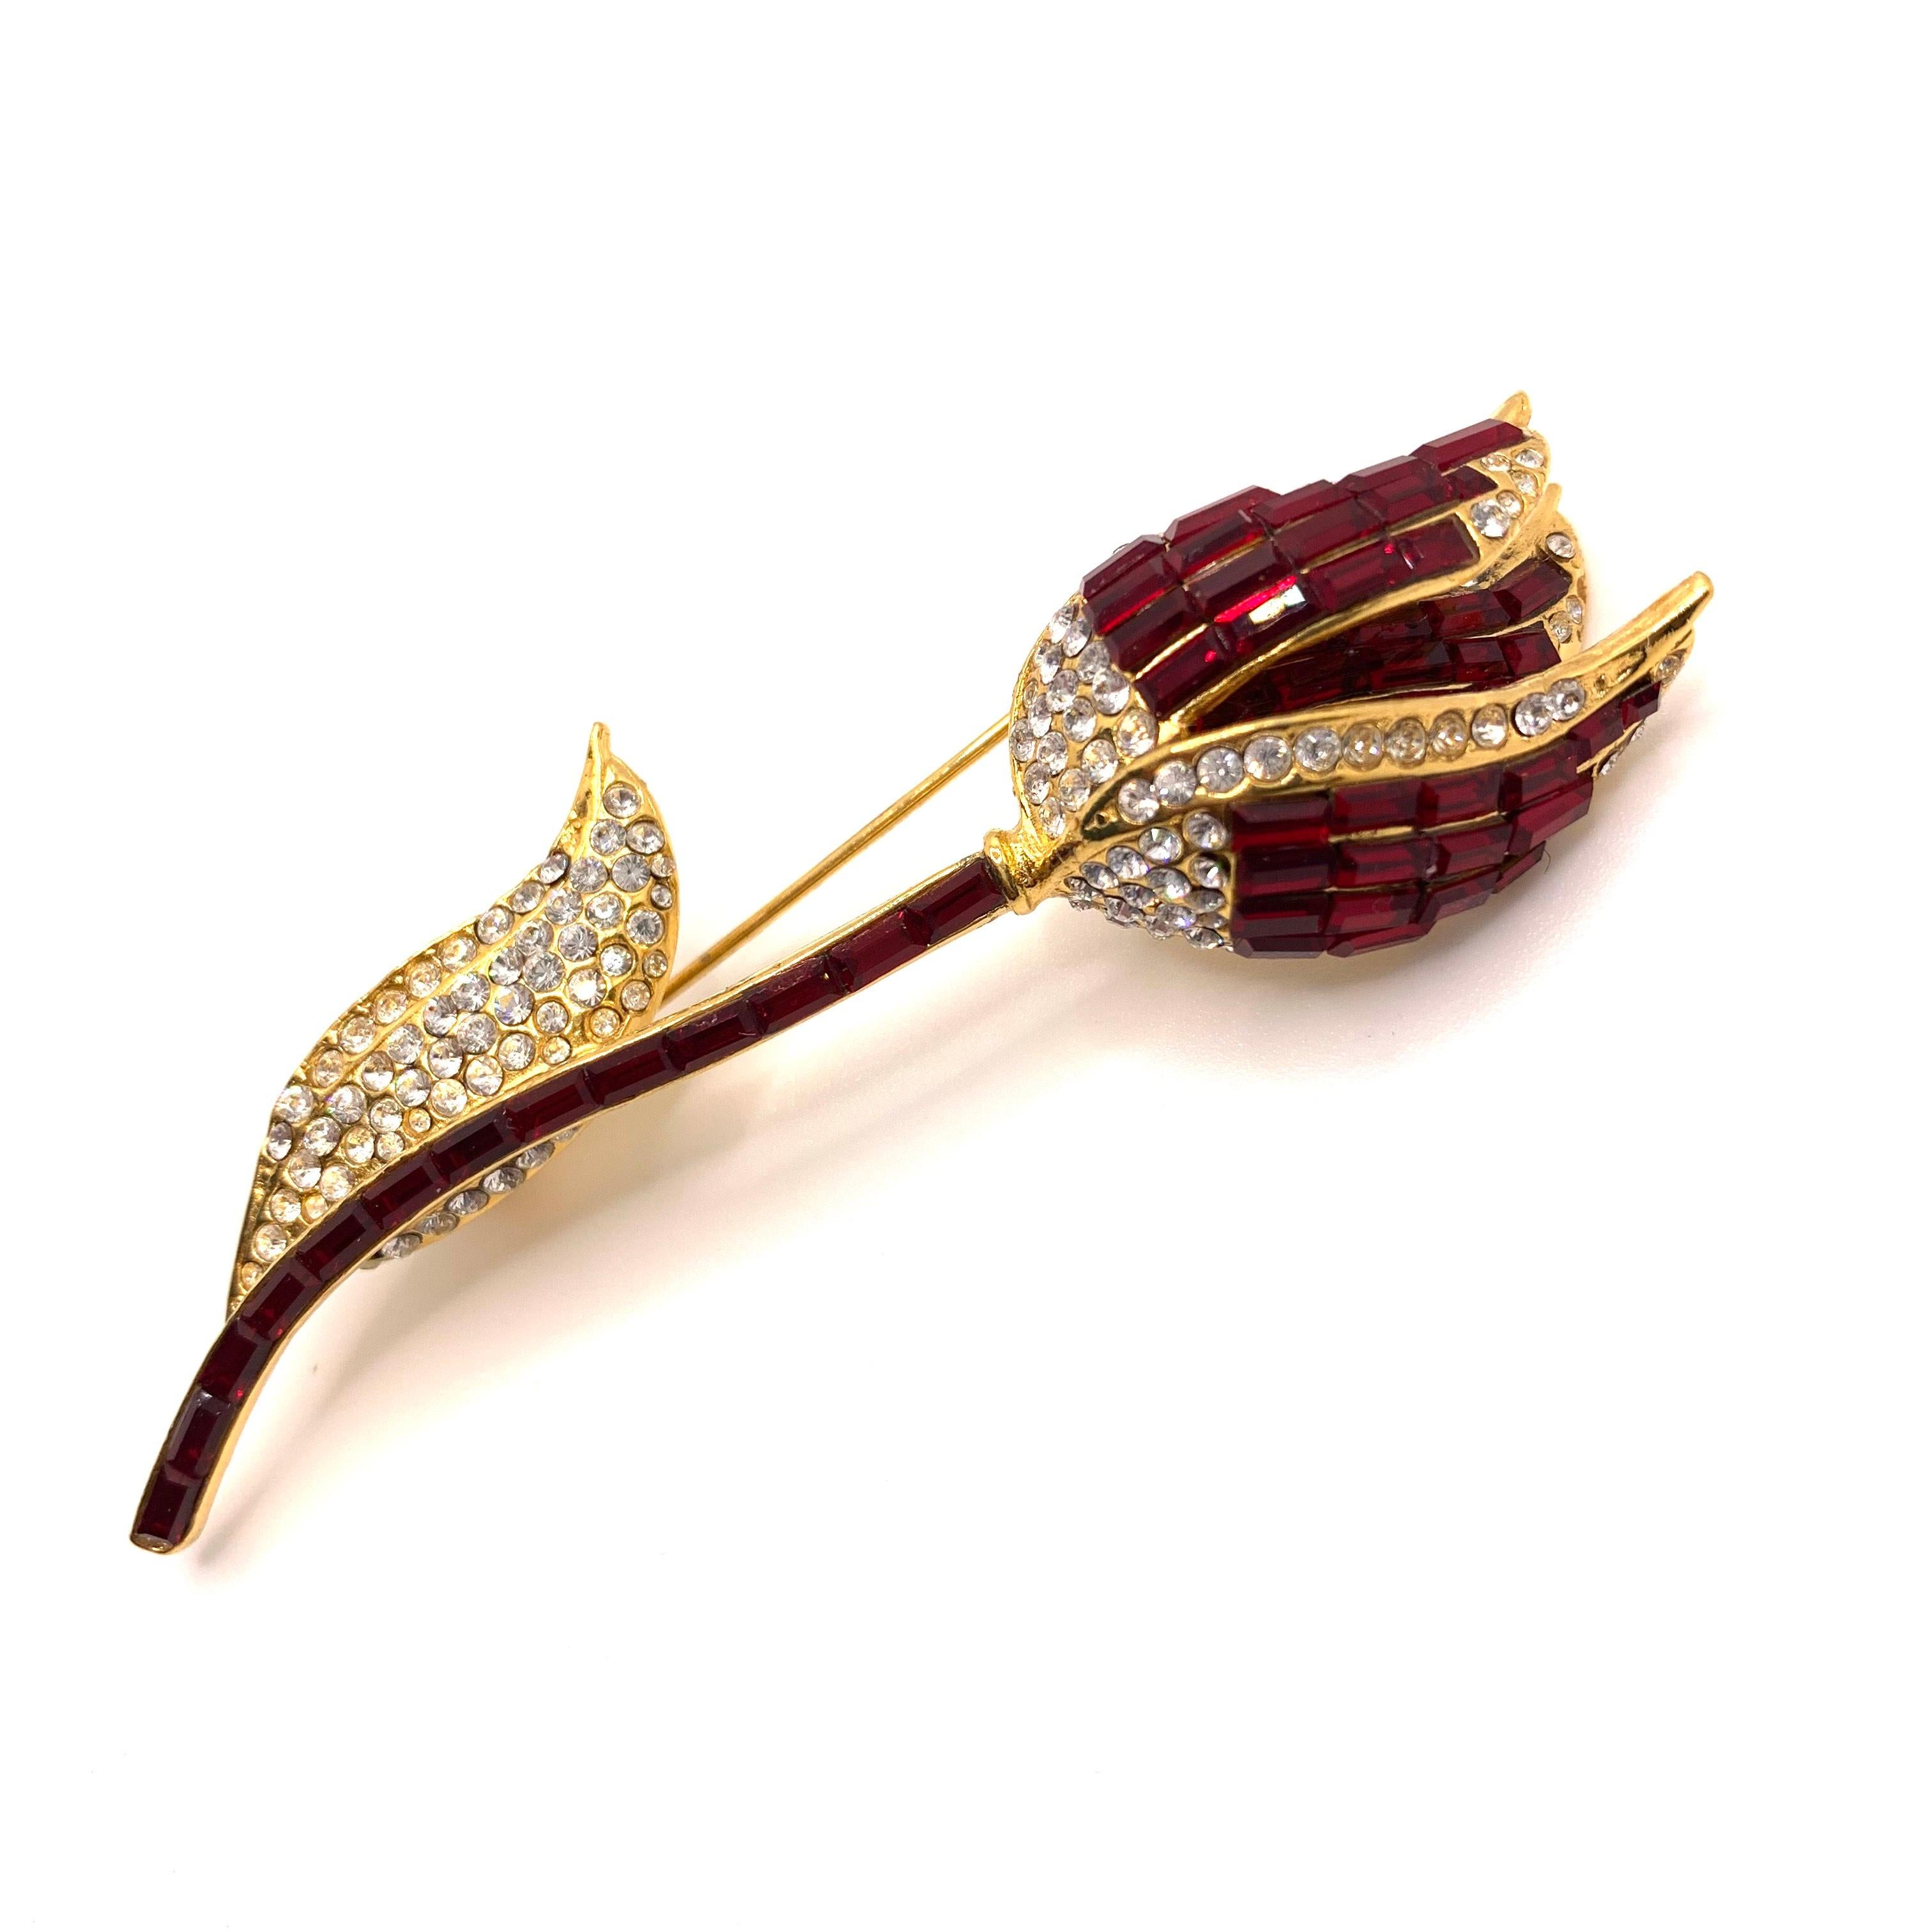 Classic Elegant Vintage Swarovski Ruby Red Tulip Brooch

This vintage brooch features over 180 pieces of red ruby and white Swarovski crystals in yellow gold tone. Made in the USA by New York designer brand Jarin.  3-1/4